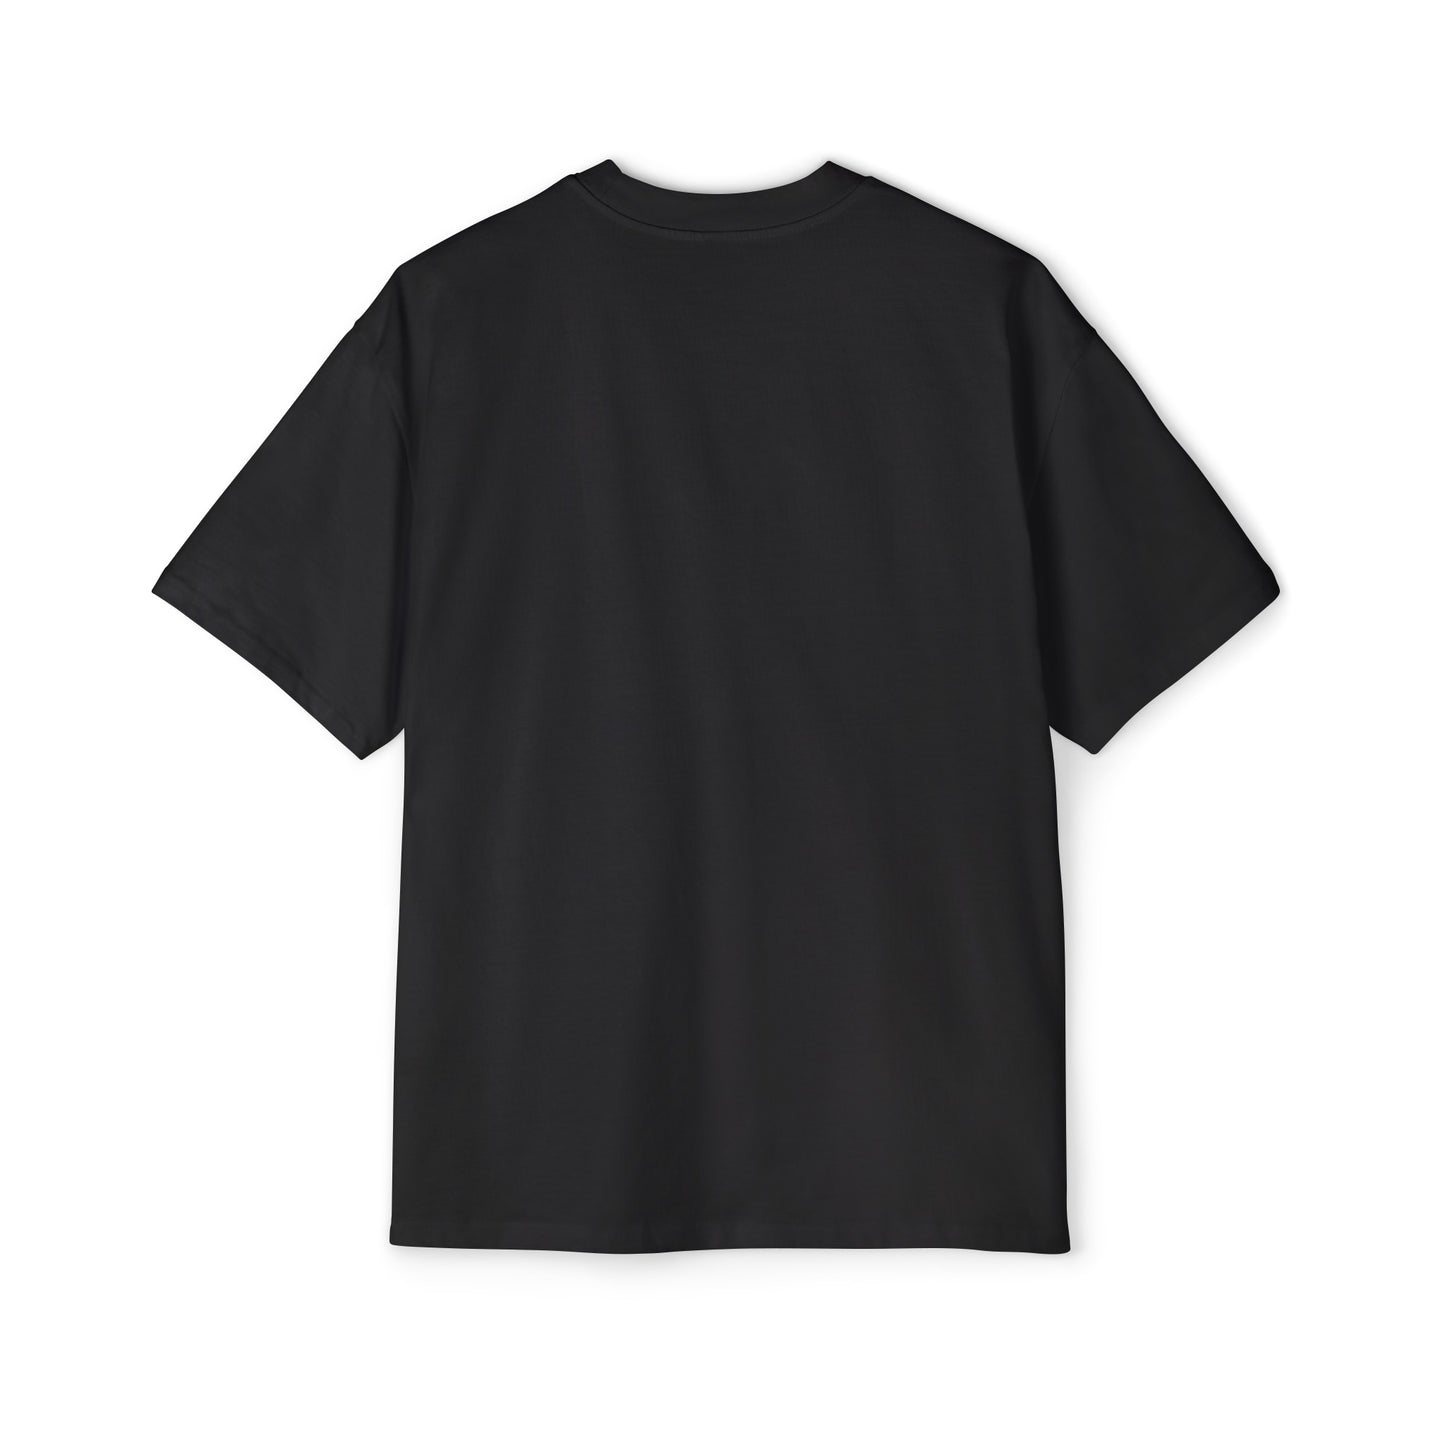 Hassir Childs Oversized Tee